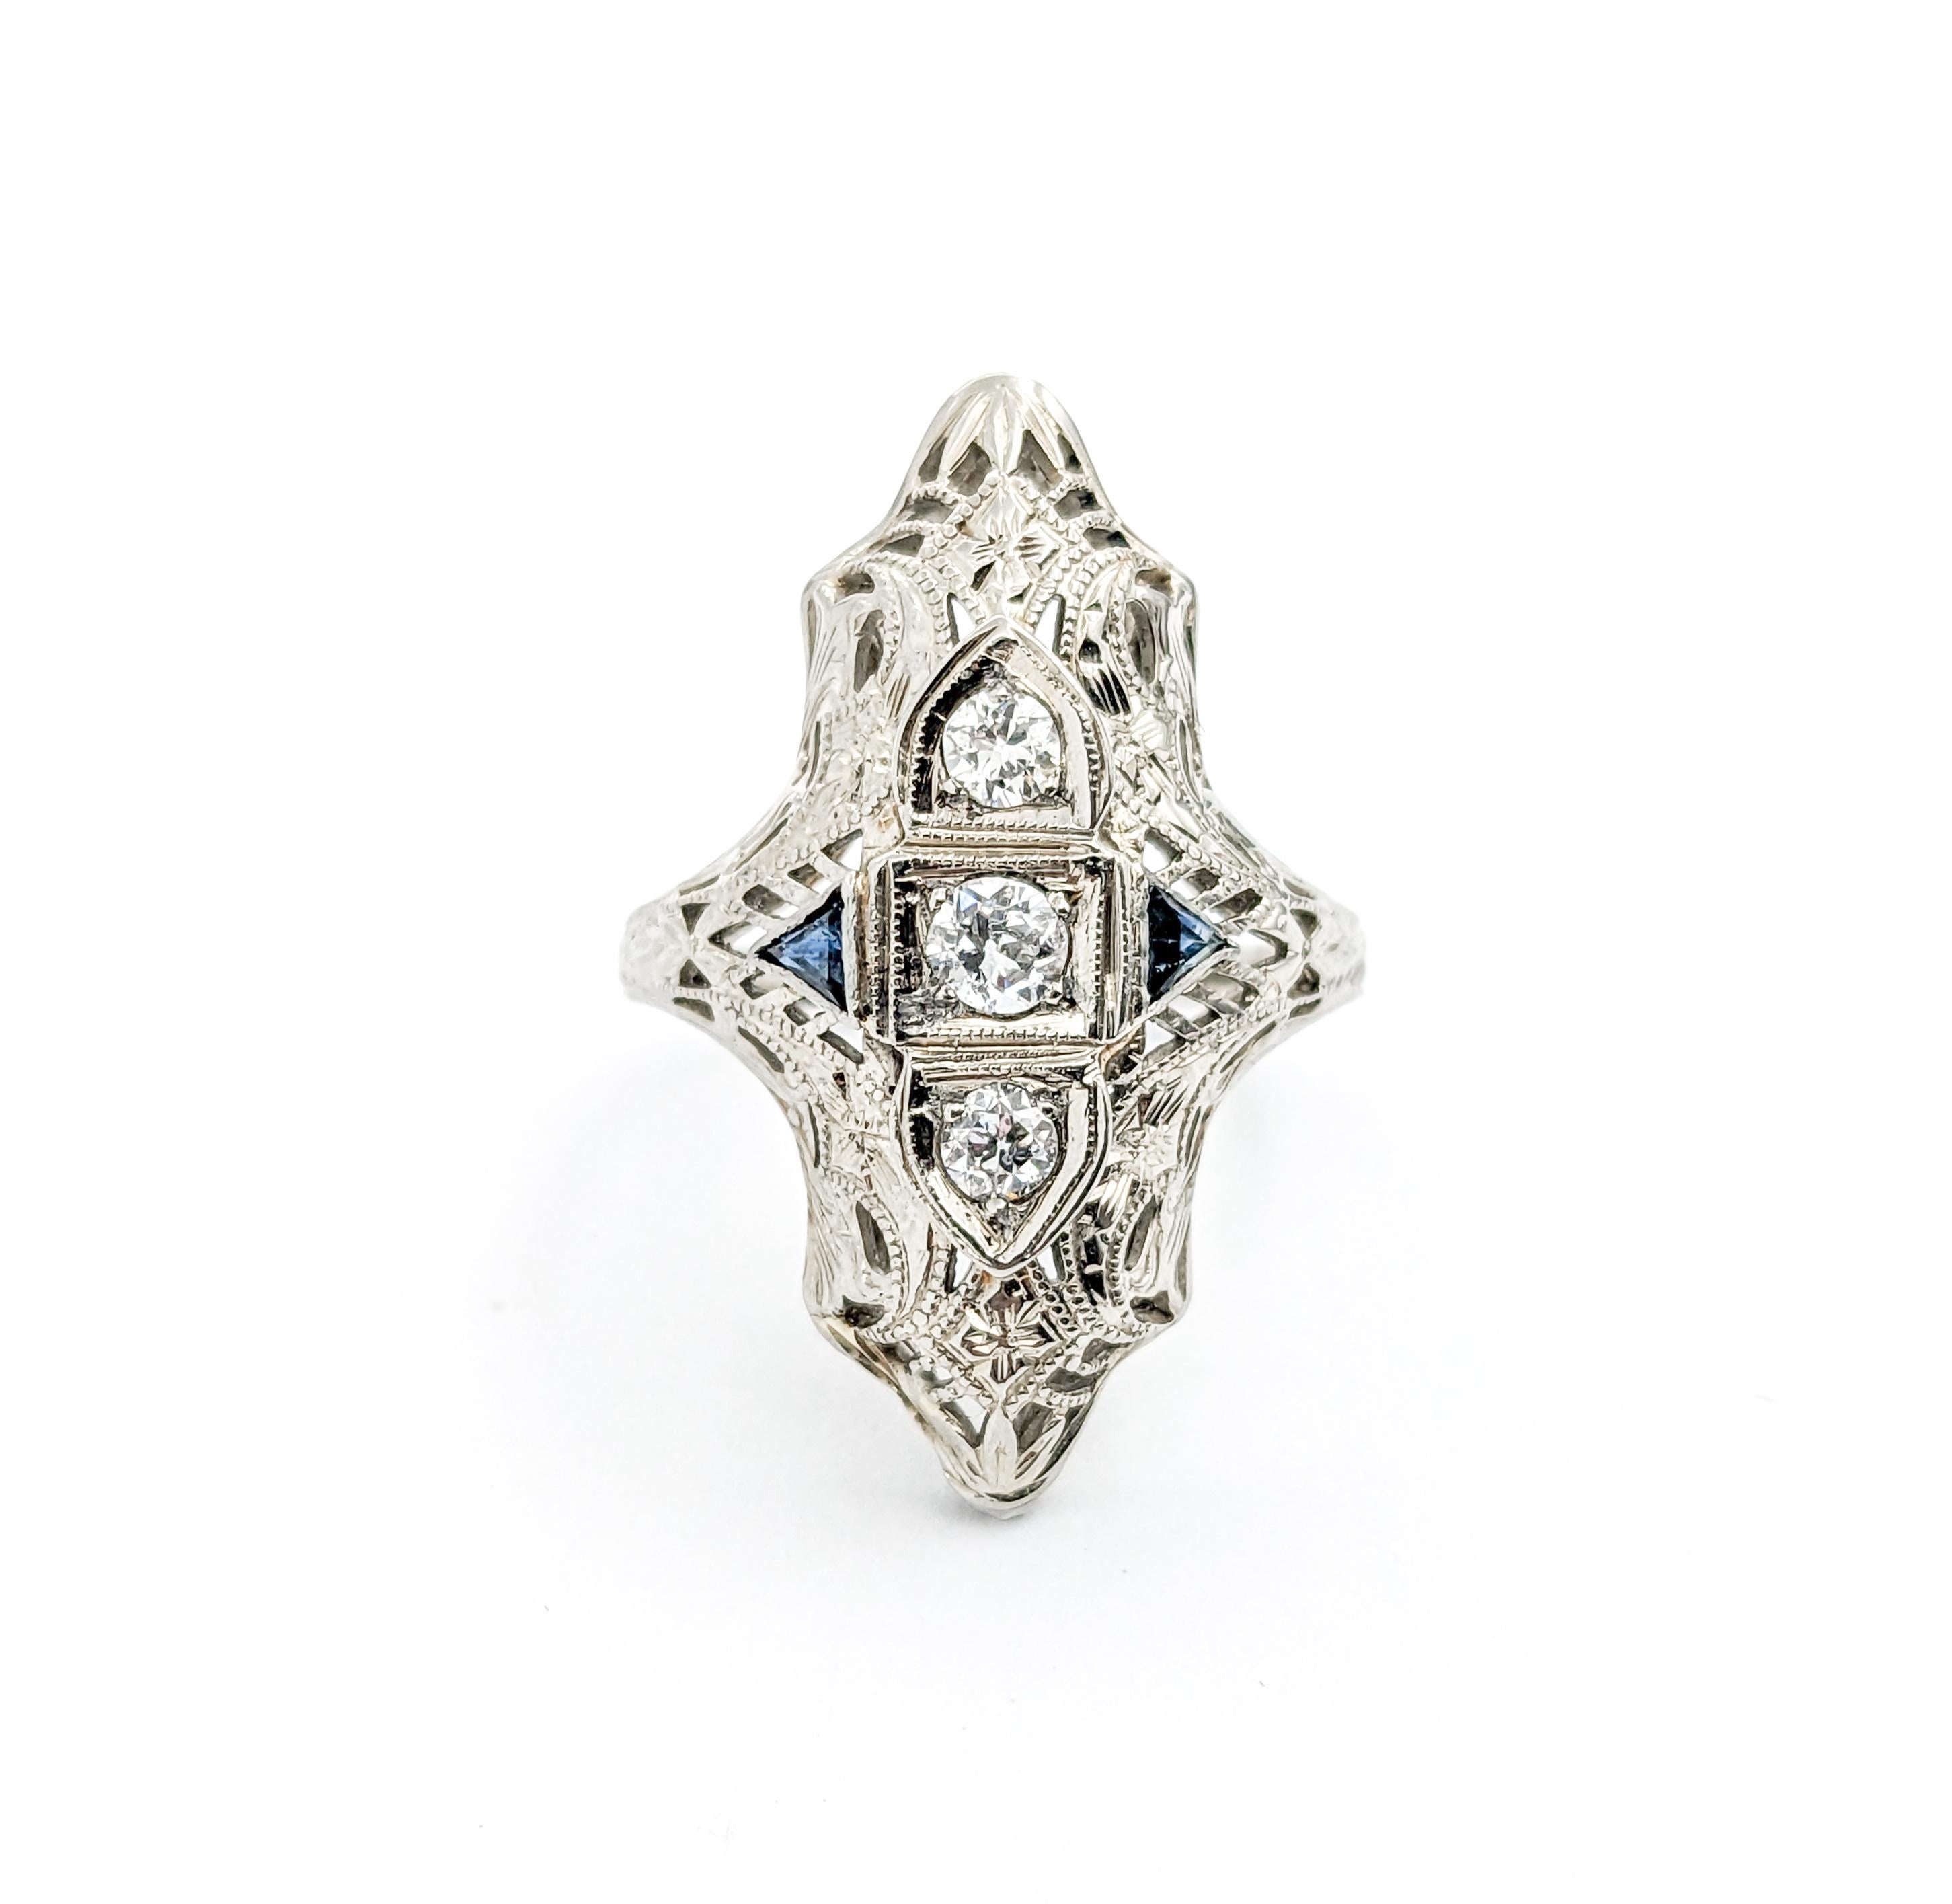 Antique Art Deco Era Diamond & Sapphire Shield Ring In White Gold In Excellent Condition For Sale In Bloomington, MN